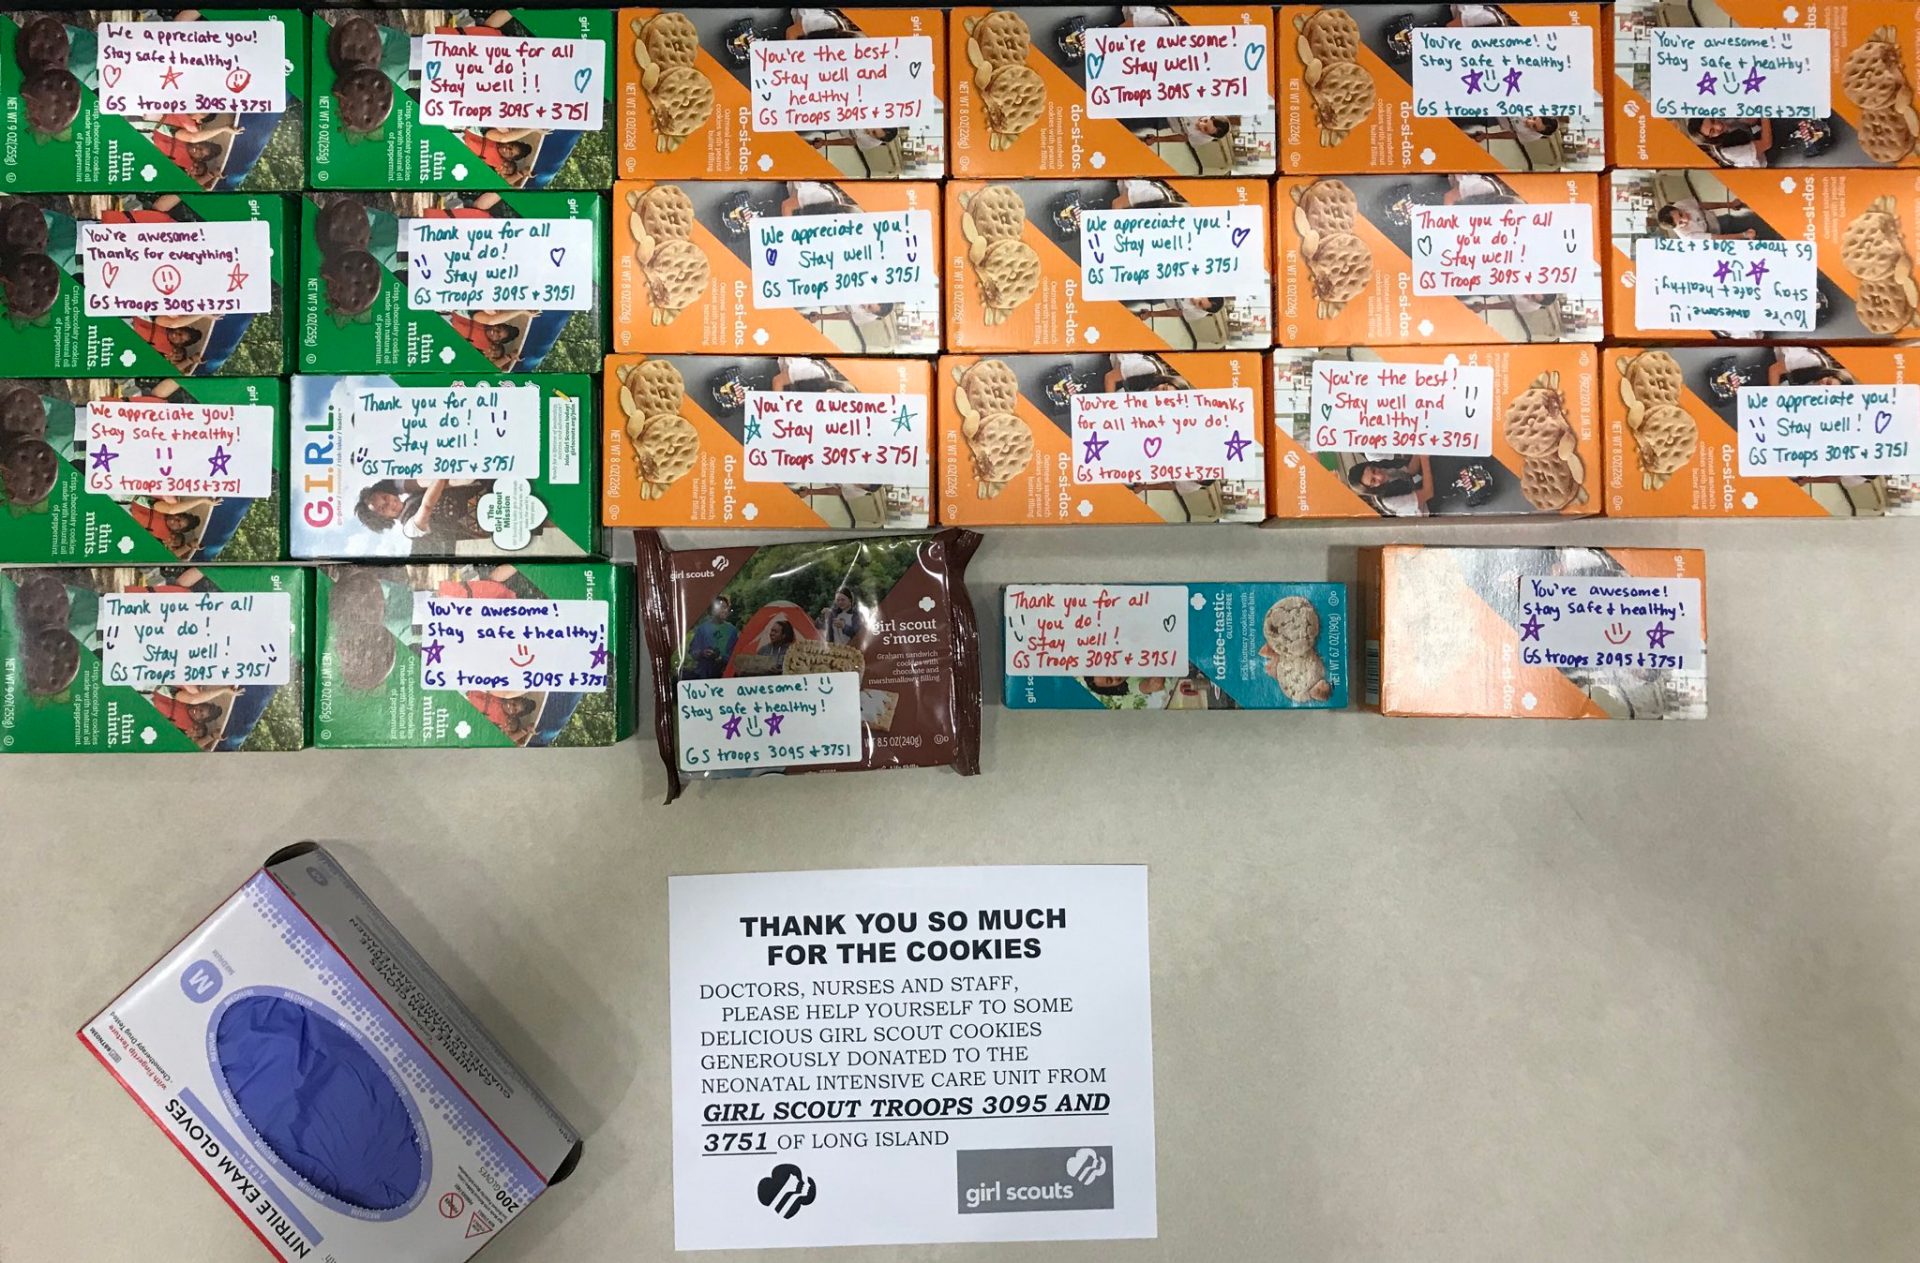 Boxes of Girl Scout Cookies with notes from Girl Scouts to hospital staff members